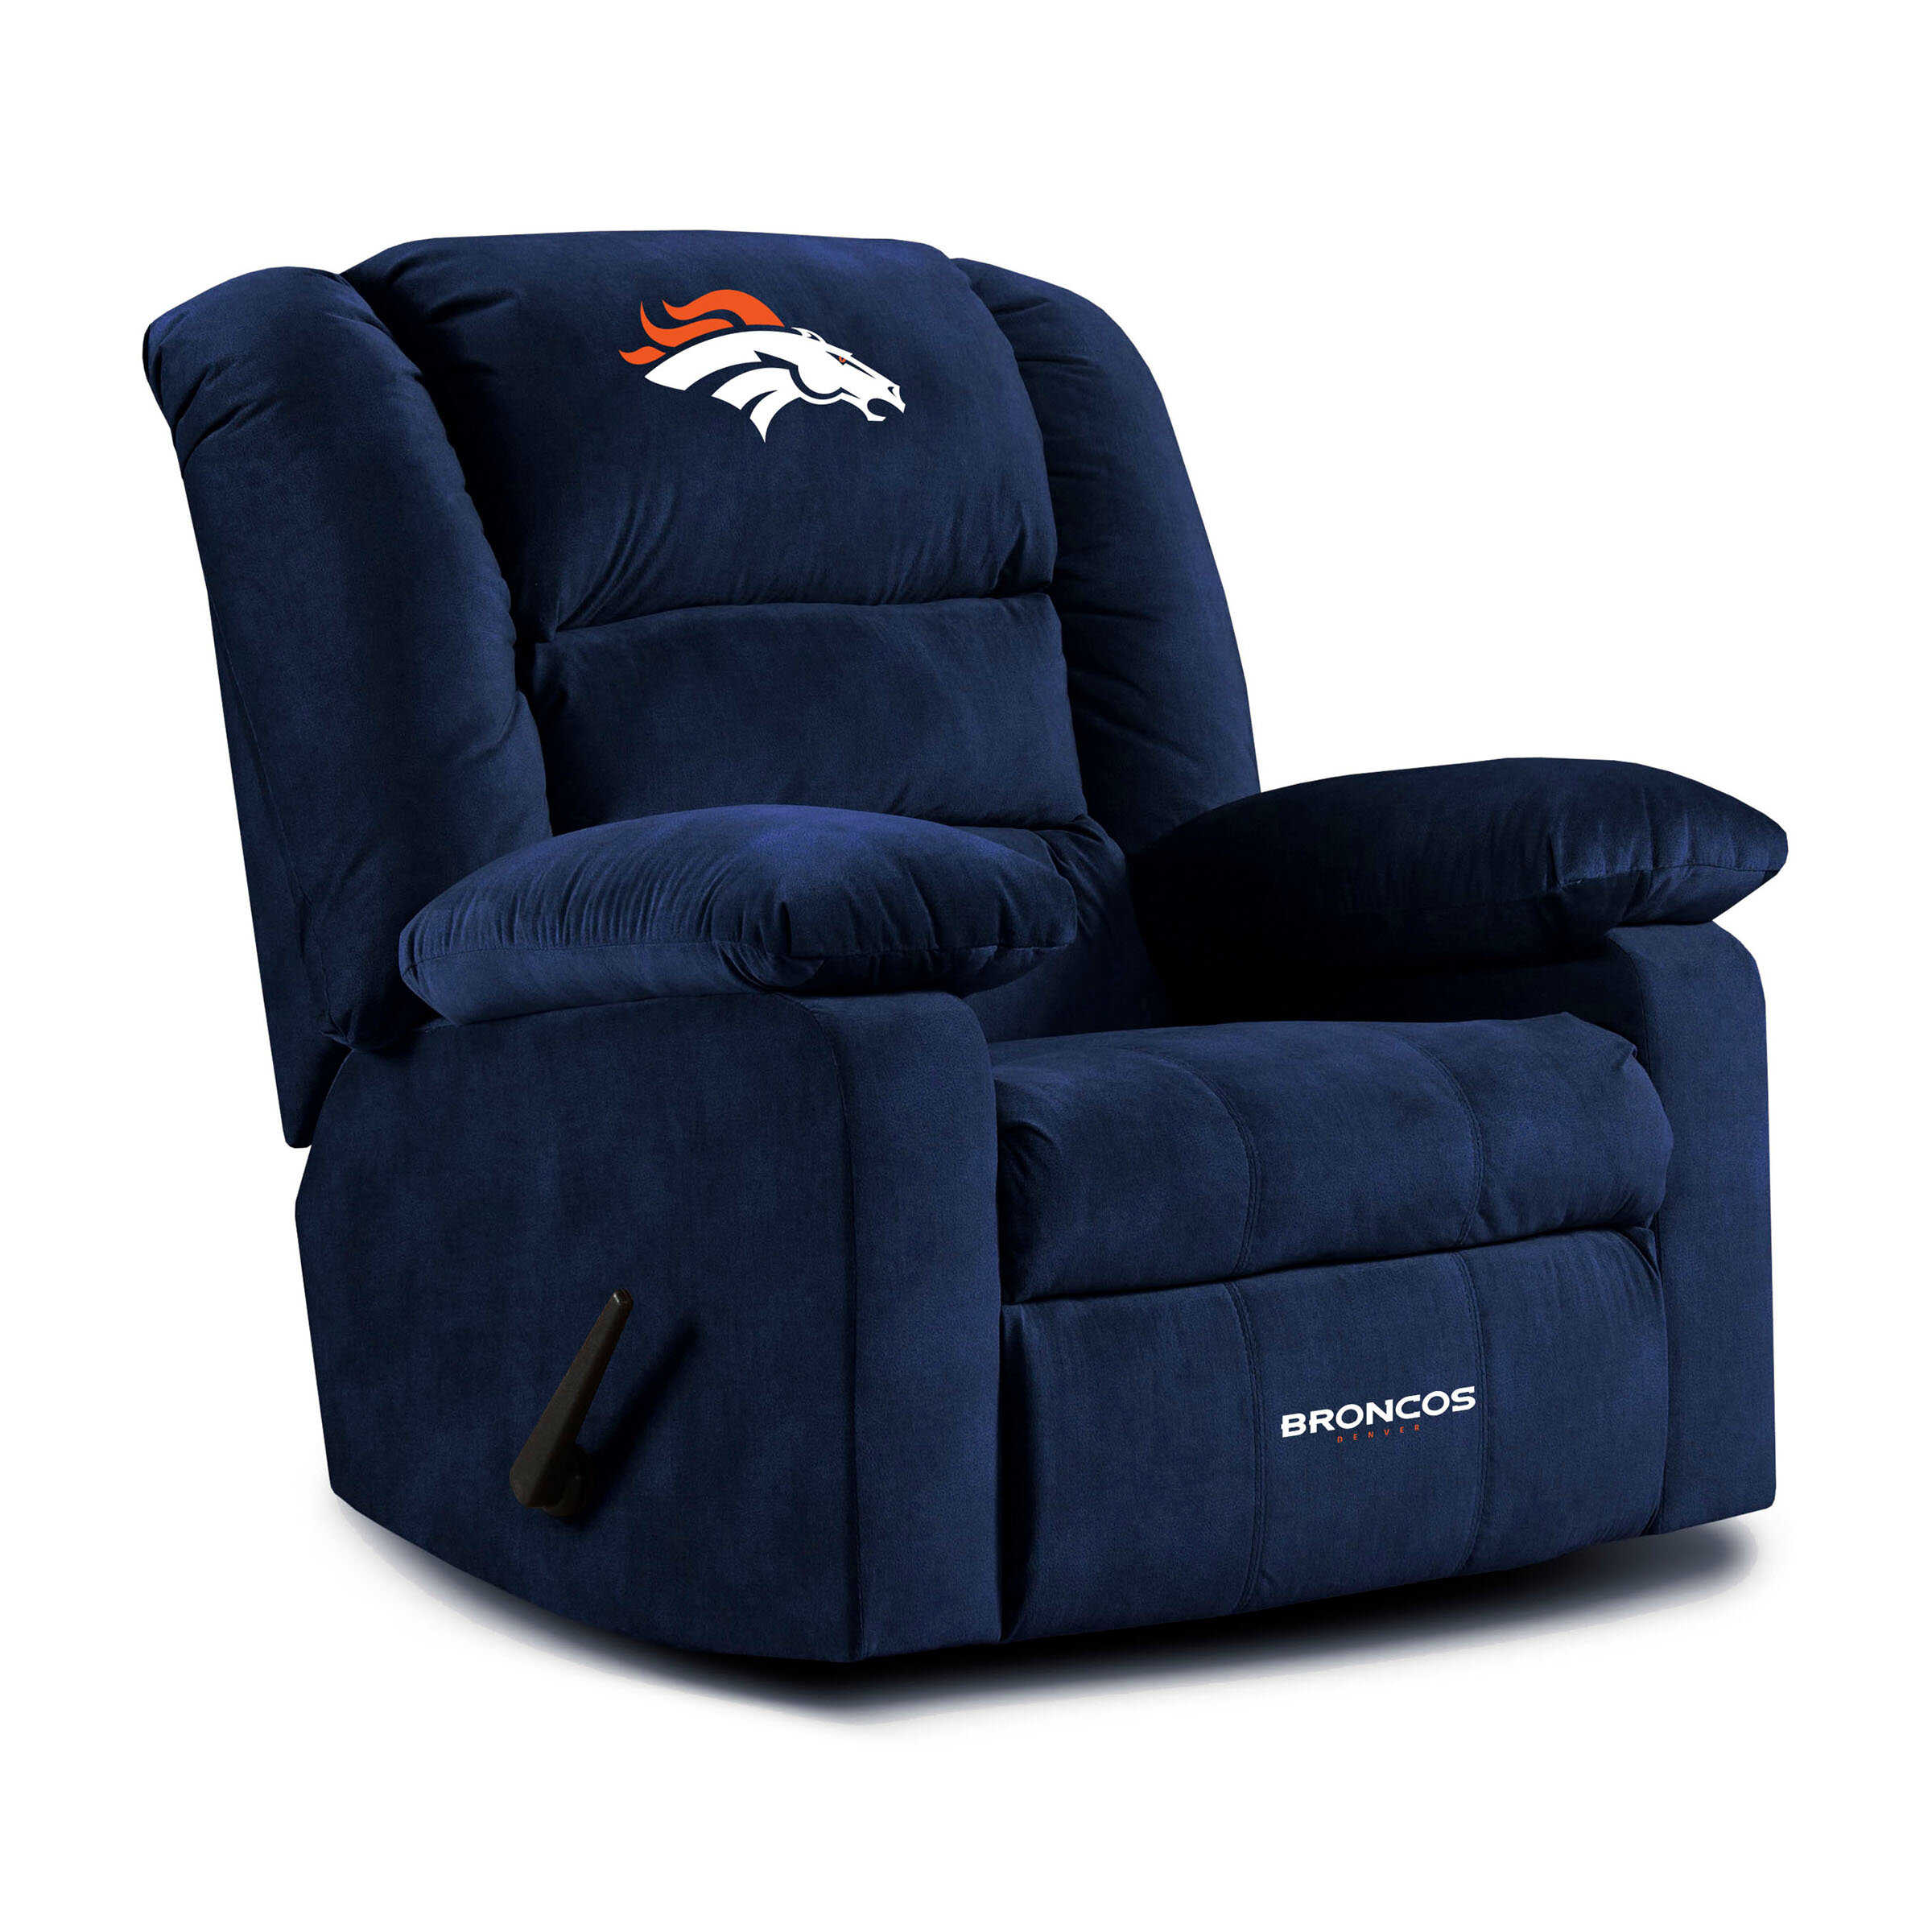 Dallas Cowboys Slipcovers Sofa Cover Recliner Chair Love Seat